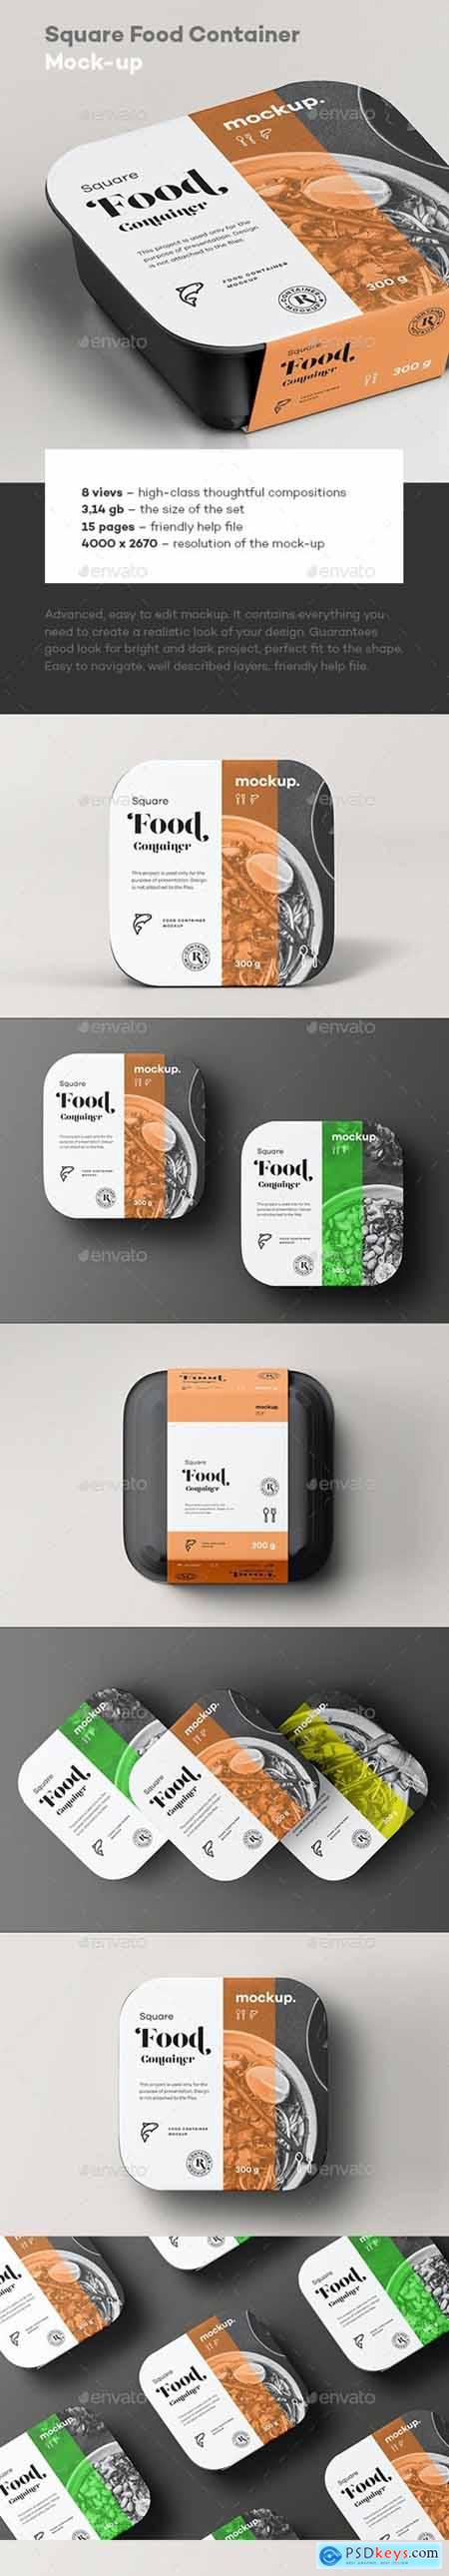 Square Food Container Mock-up 31688163